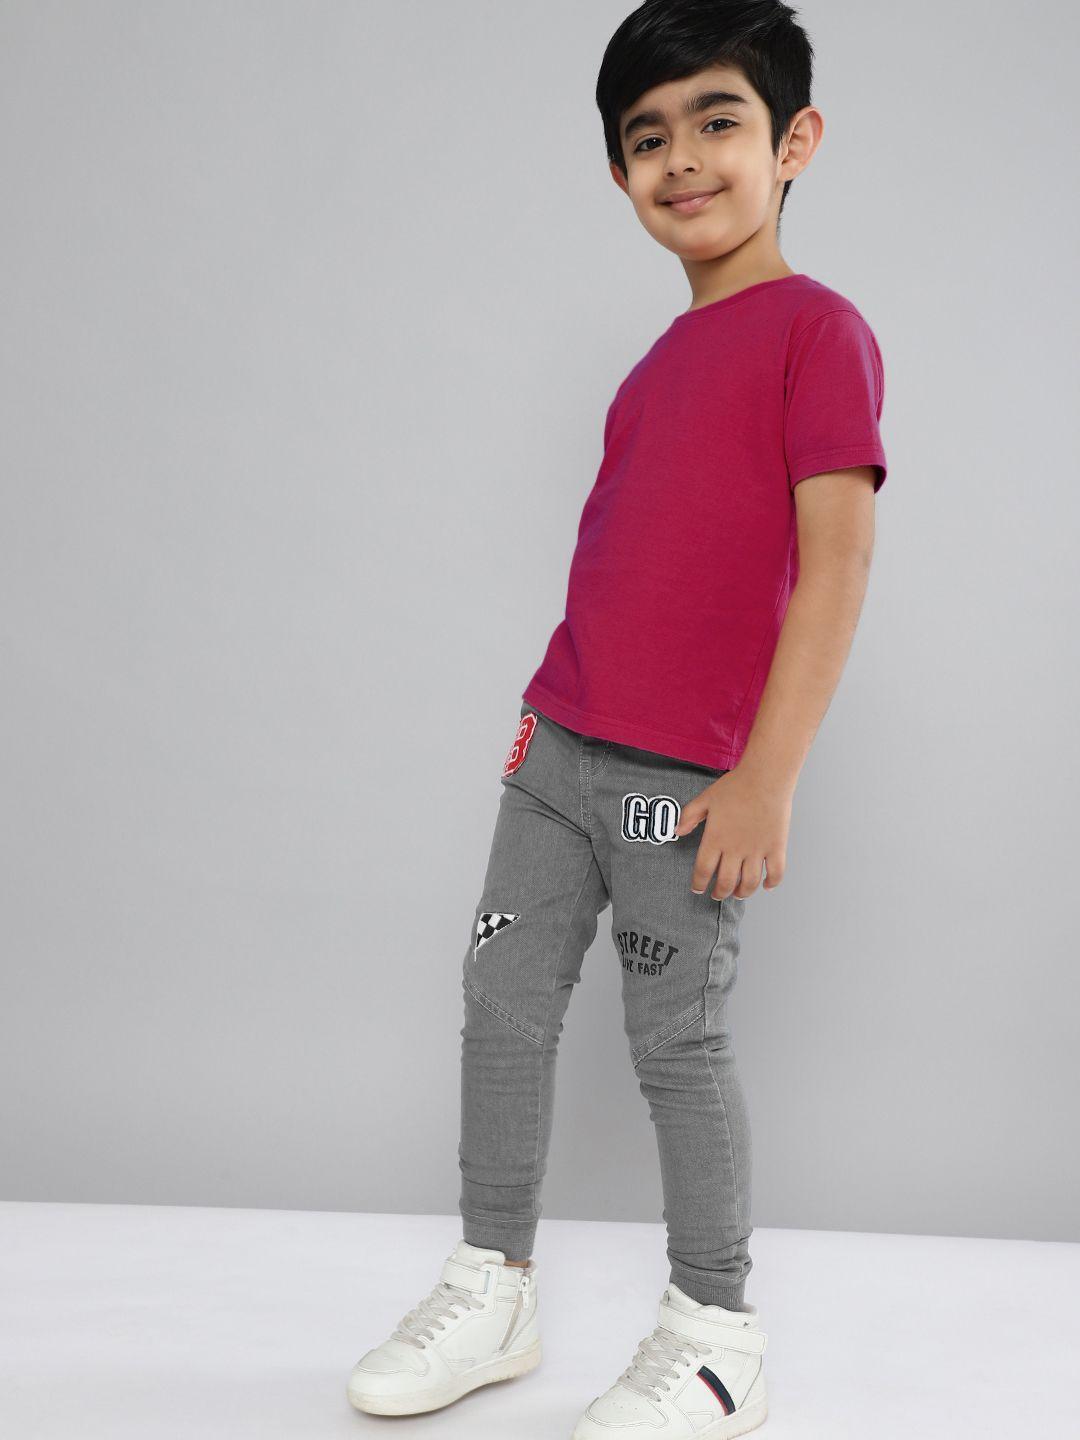 yk-boys-charcoal-grey-regular-fit-solid-denim-jogg-trousers-with-applique-detail